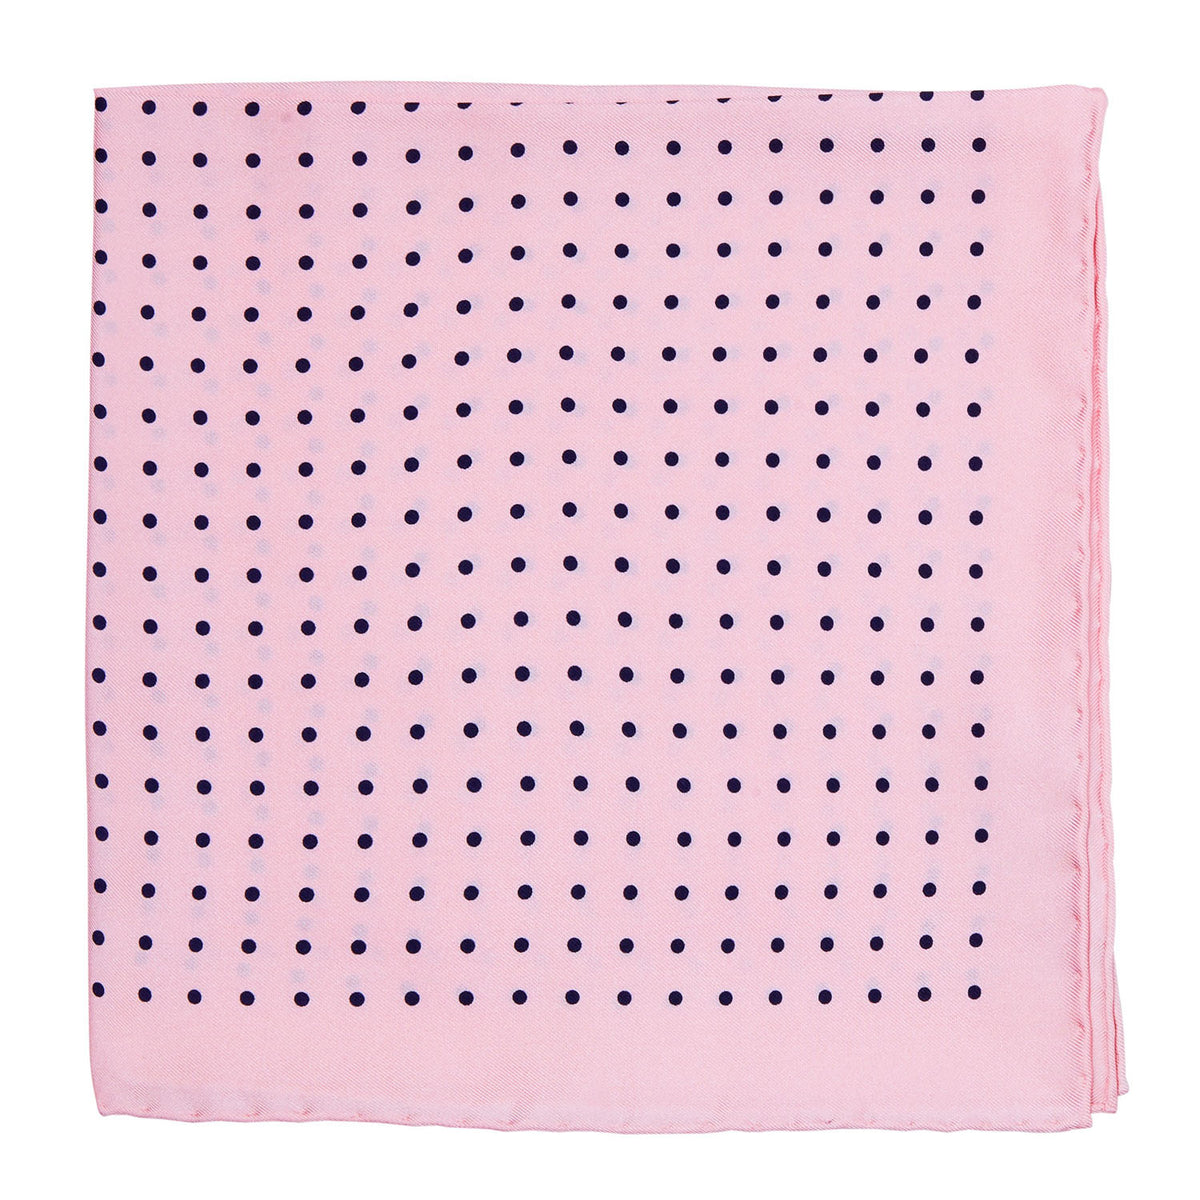 A hand-rolled Sovereign Grade 100% Silk Pink London Dot Pocket Square with pink polka dots and black dots by KirbyAllison.com.